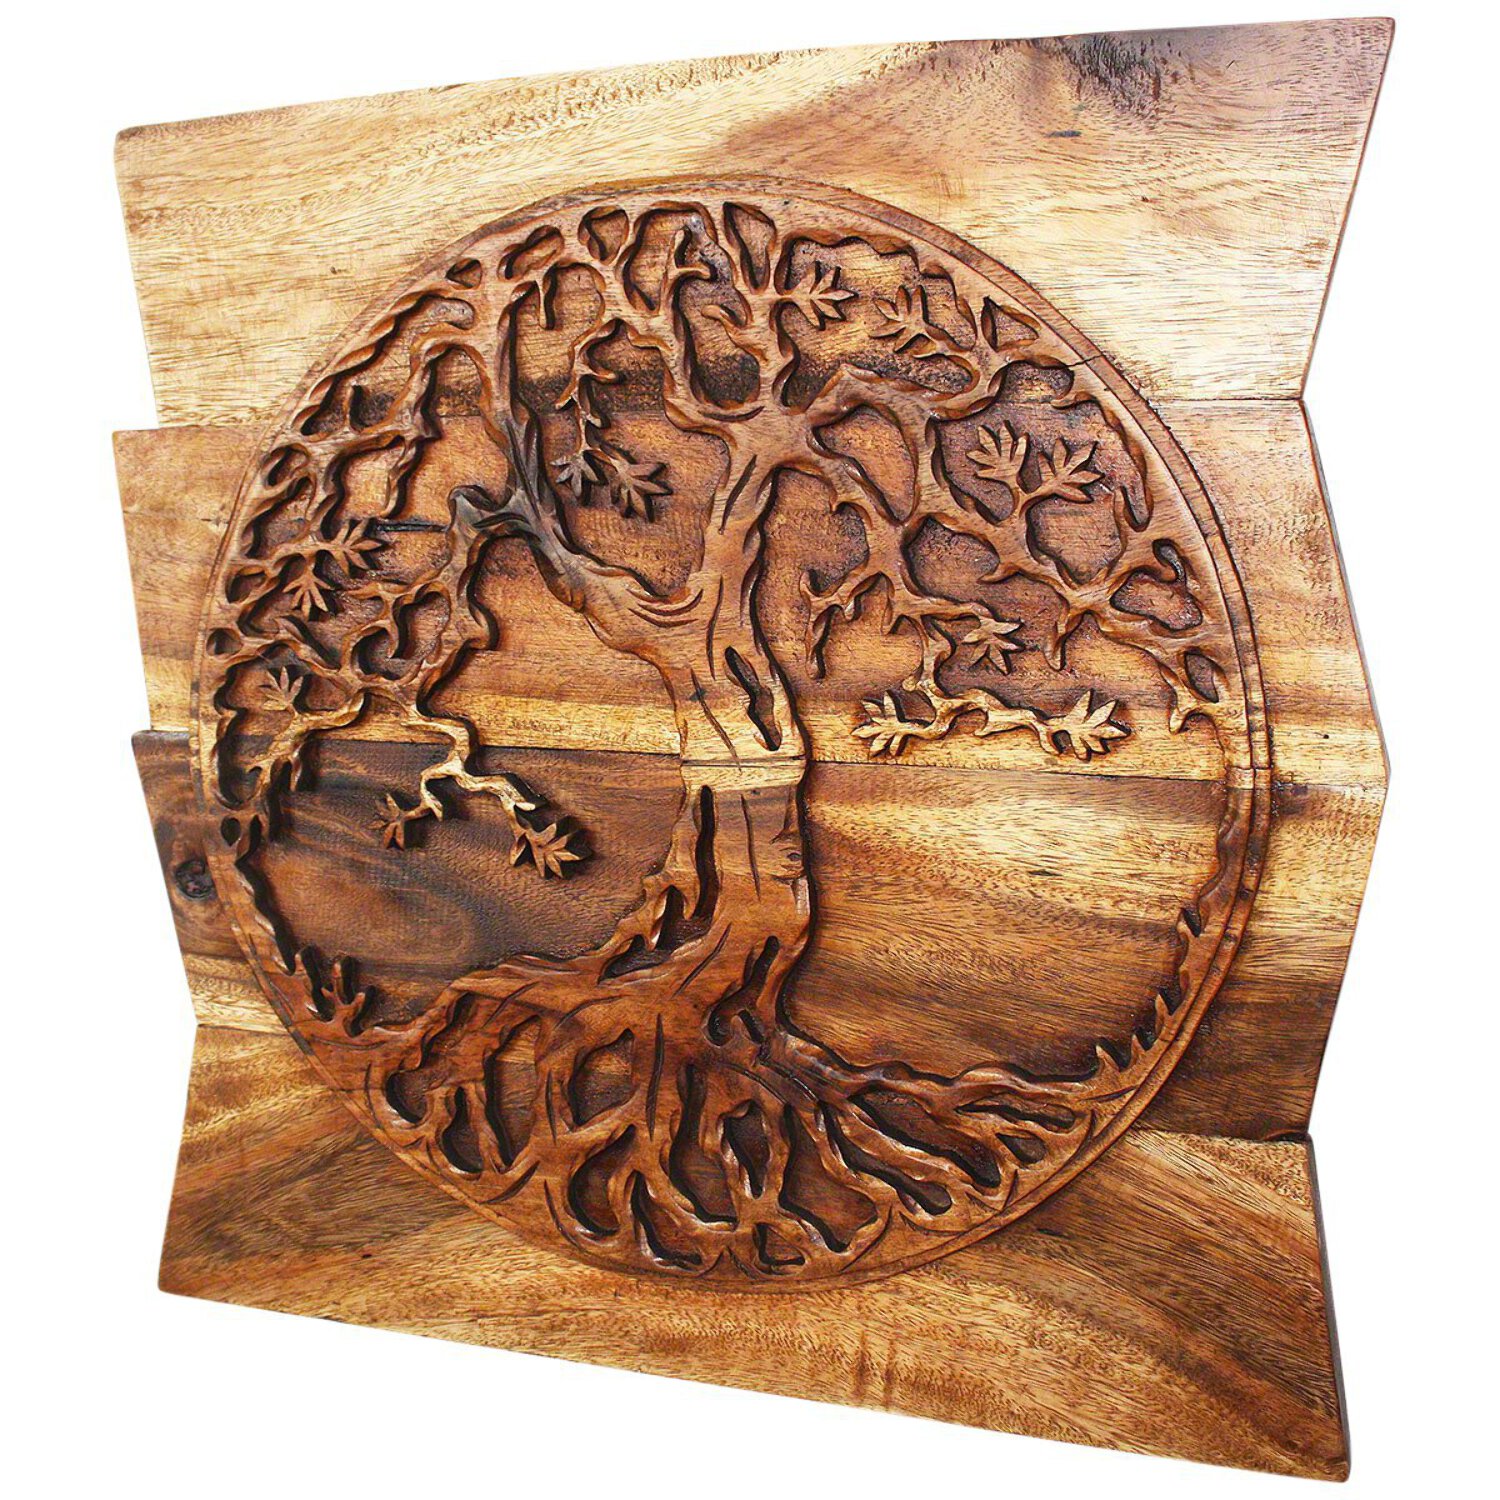 Haussmann® Wood Tree of Life Round on Uneven Boards 24 x 24 in Walnut - image 1 of 2